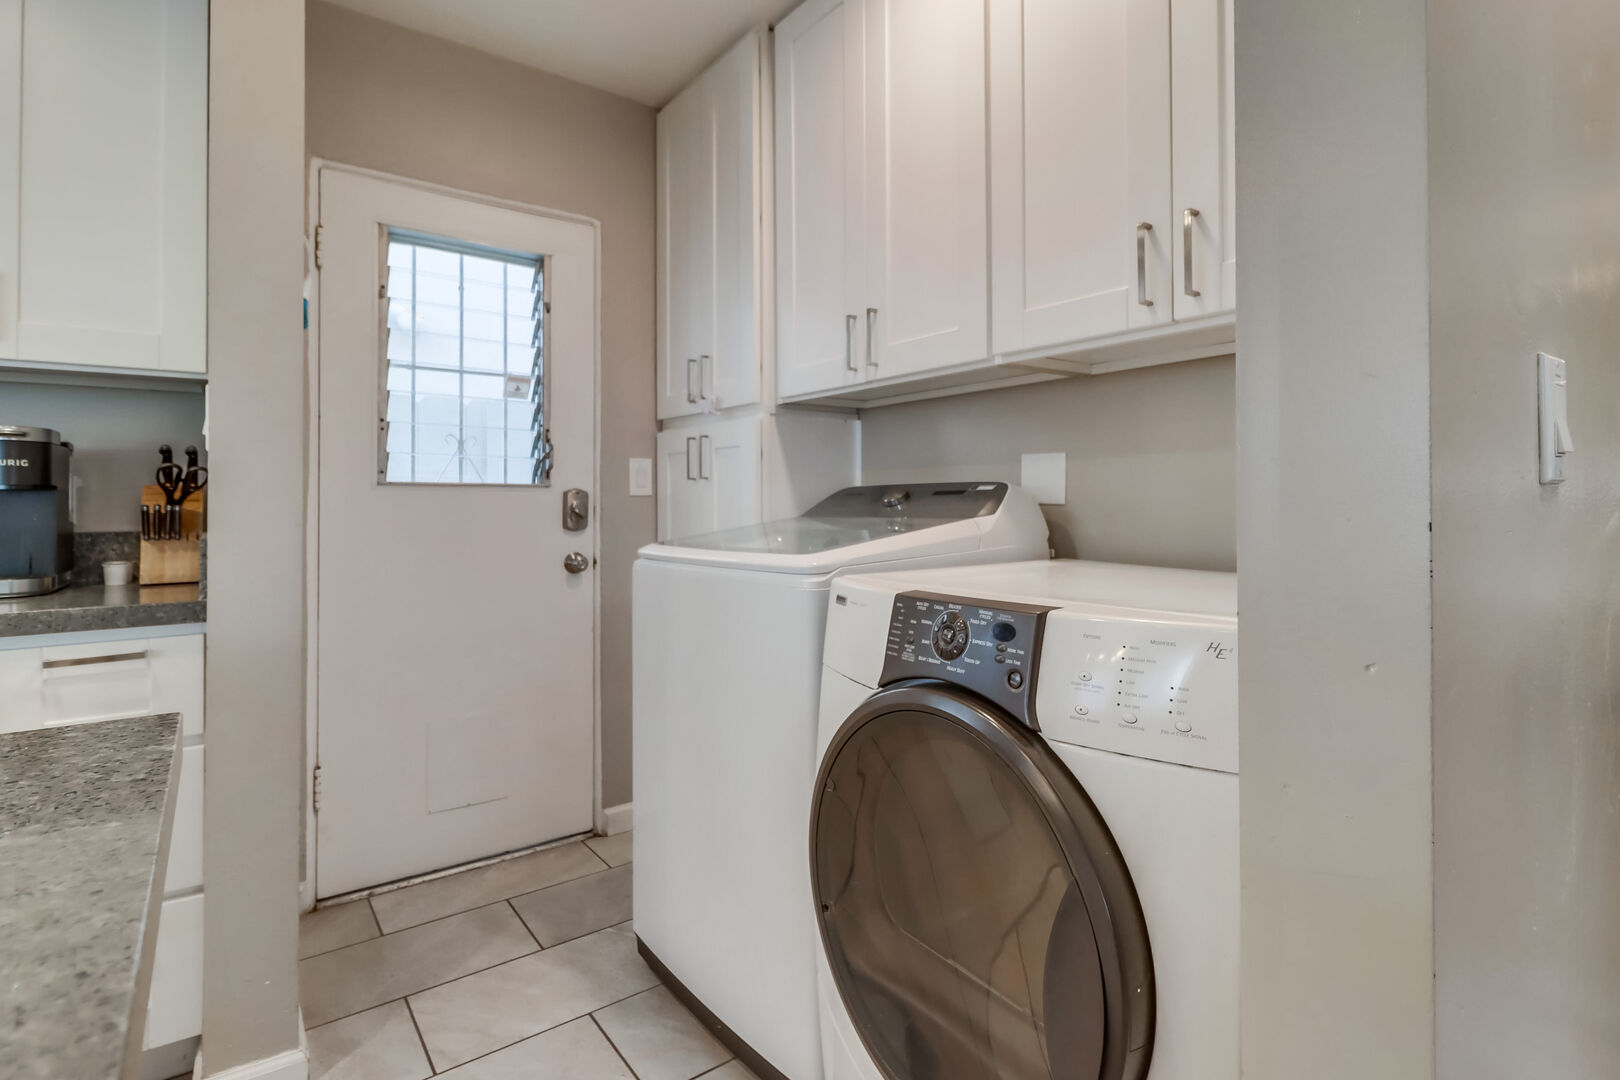 Full capacity washer and dryer adjacent to kitchen